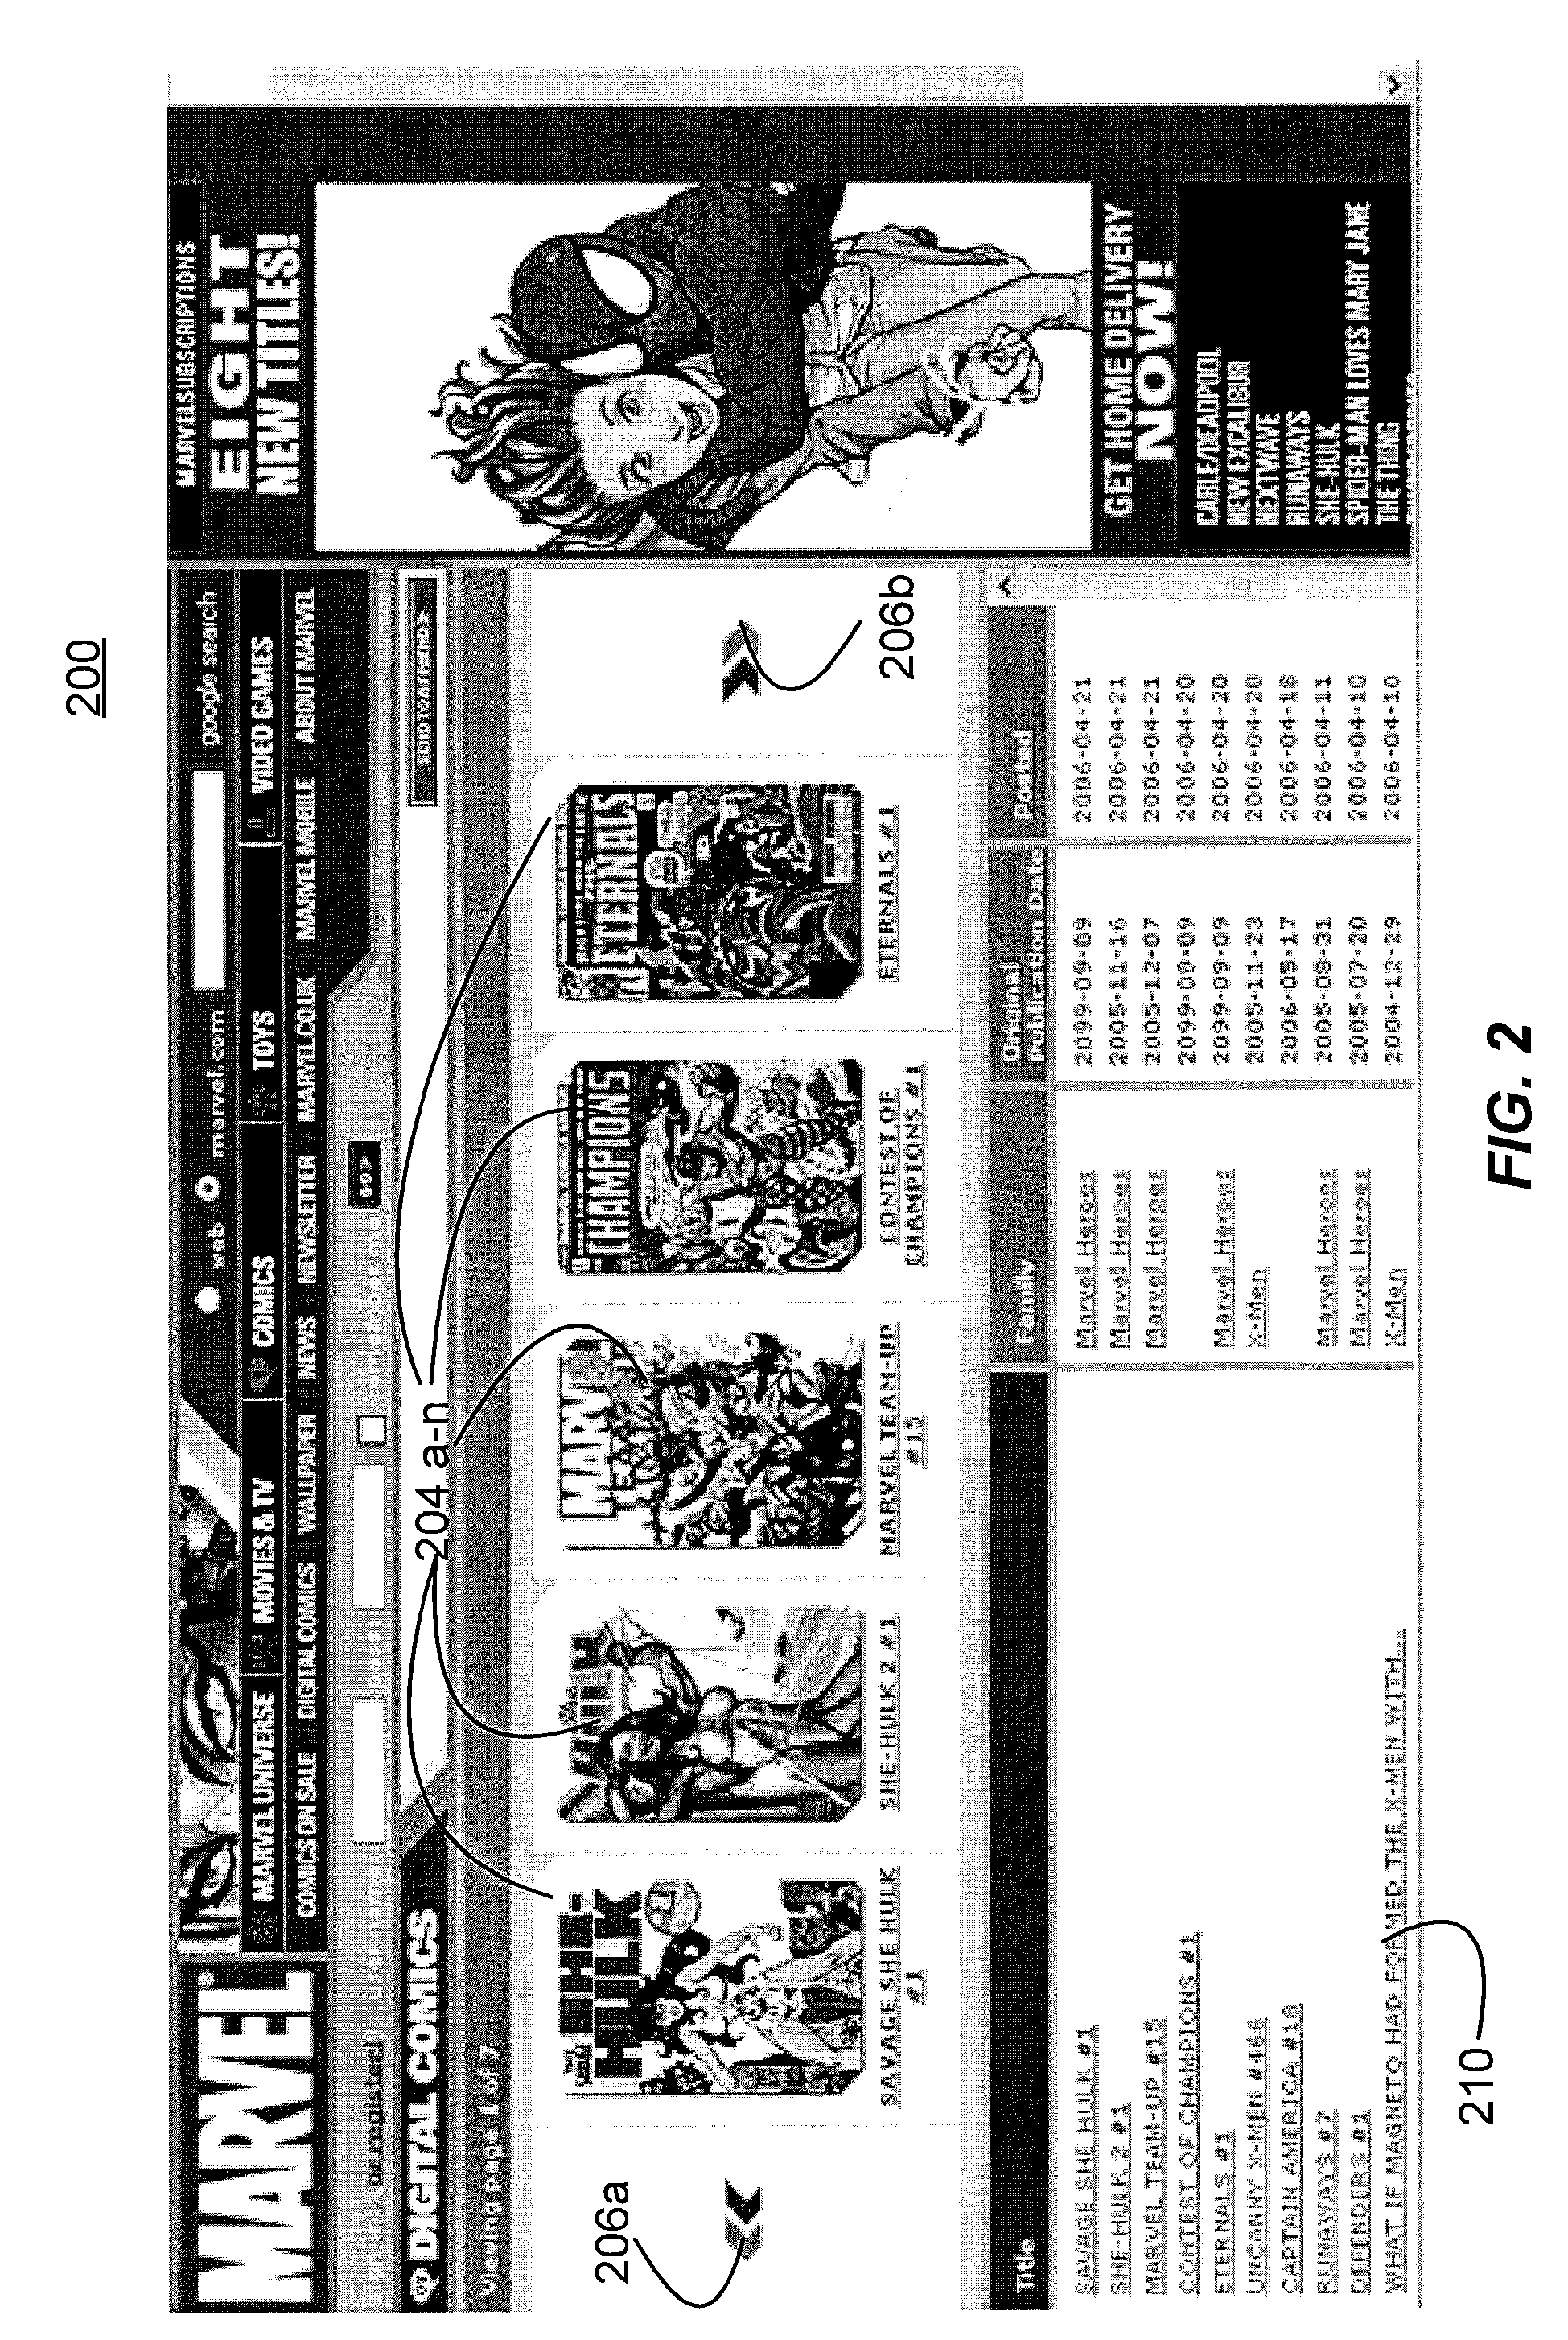 Methods, Systems, and Computer Program Products for Navigating a Sequence of Illustrative Scenes within a Digital Production